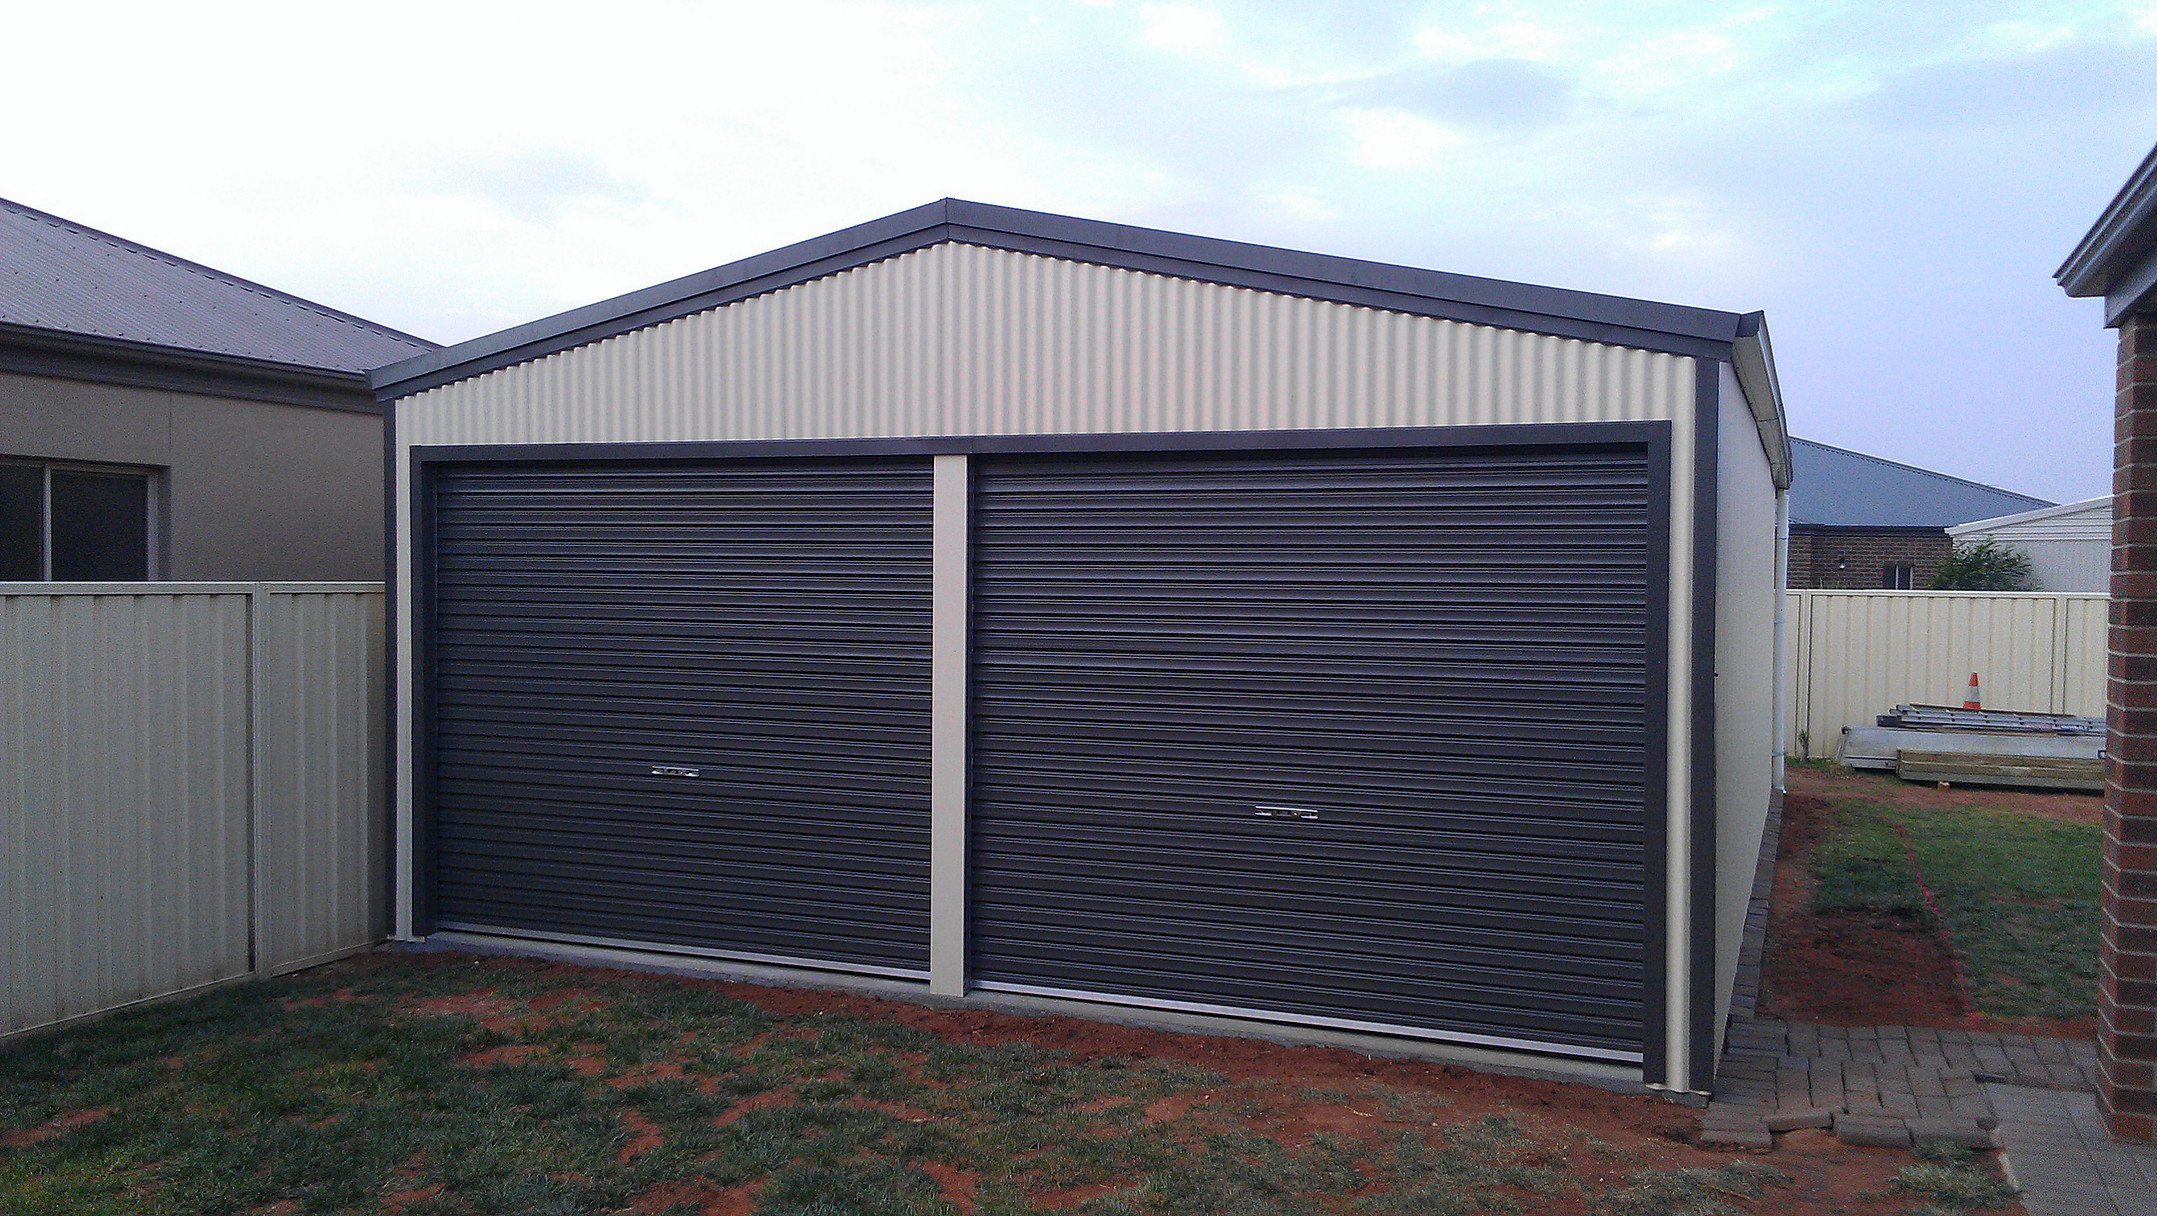 High Quality Single &amp; Double Car Garage Sheds for Sale Perth, WA